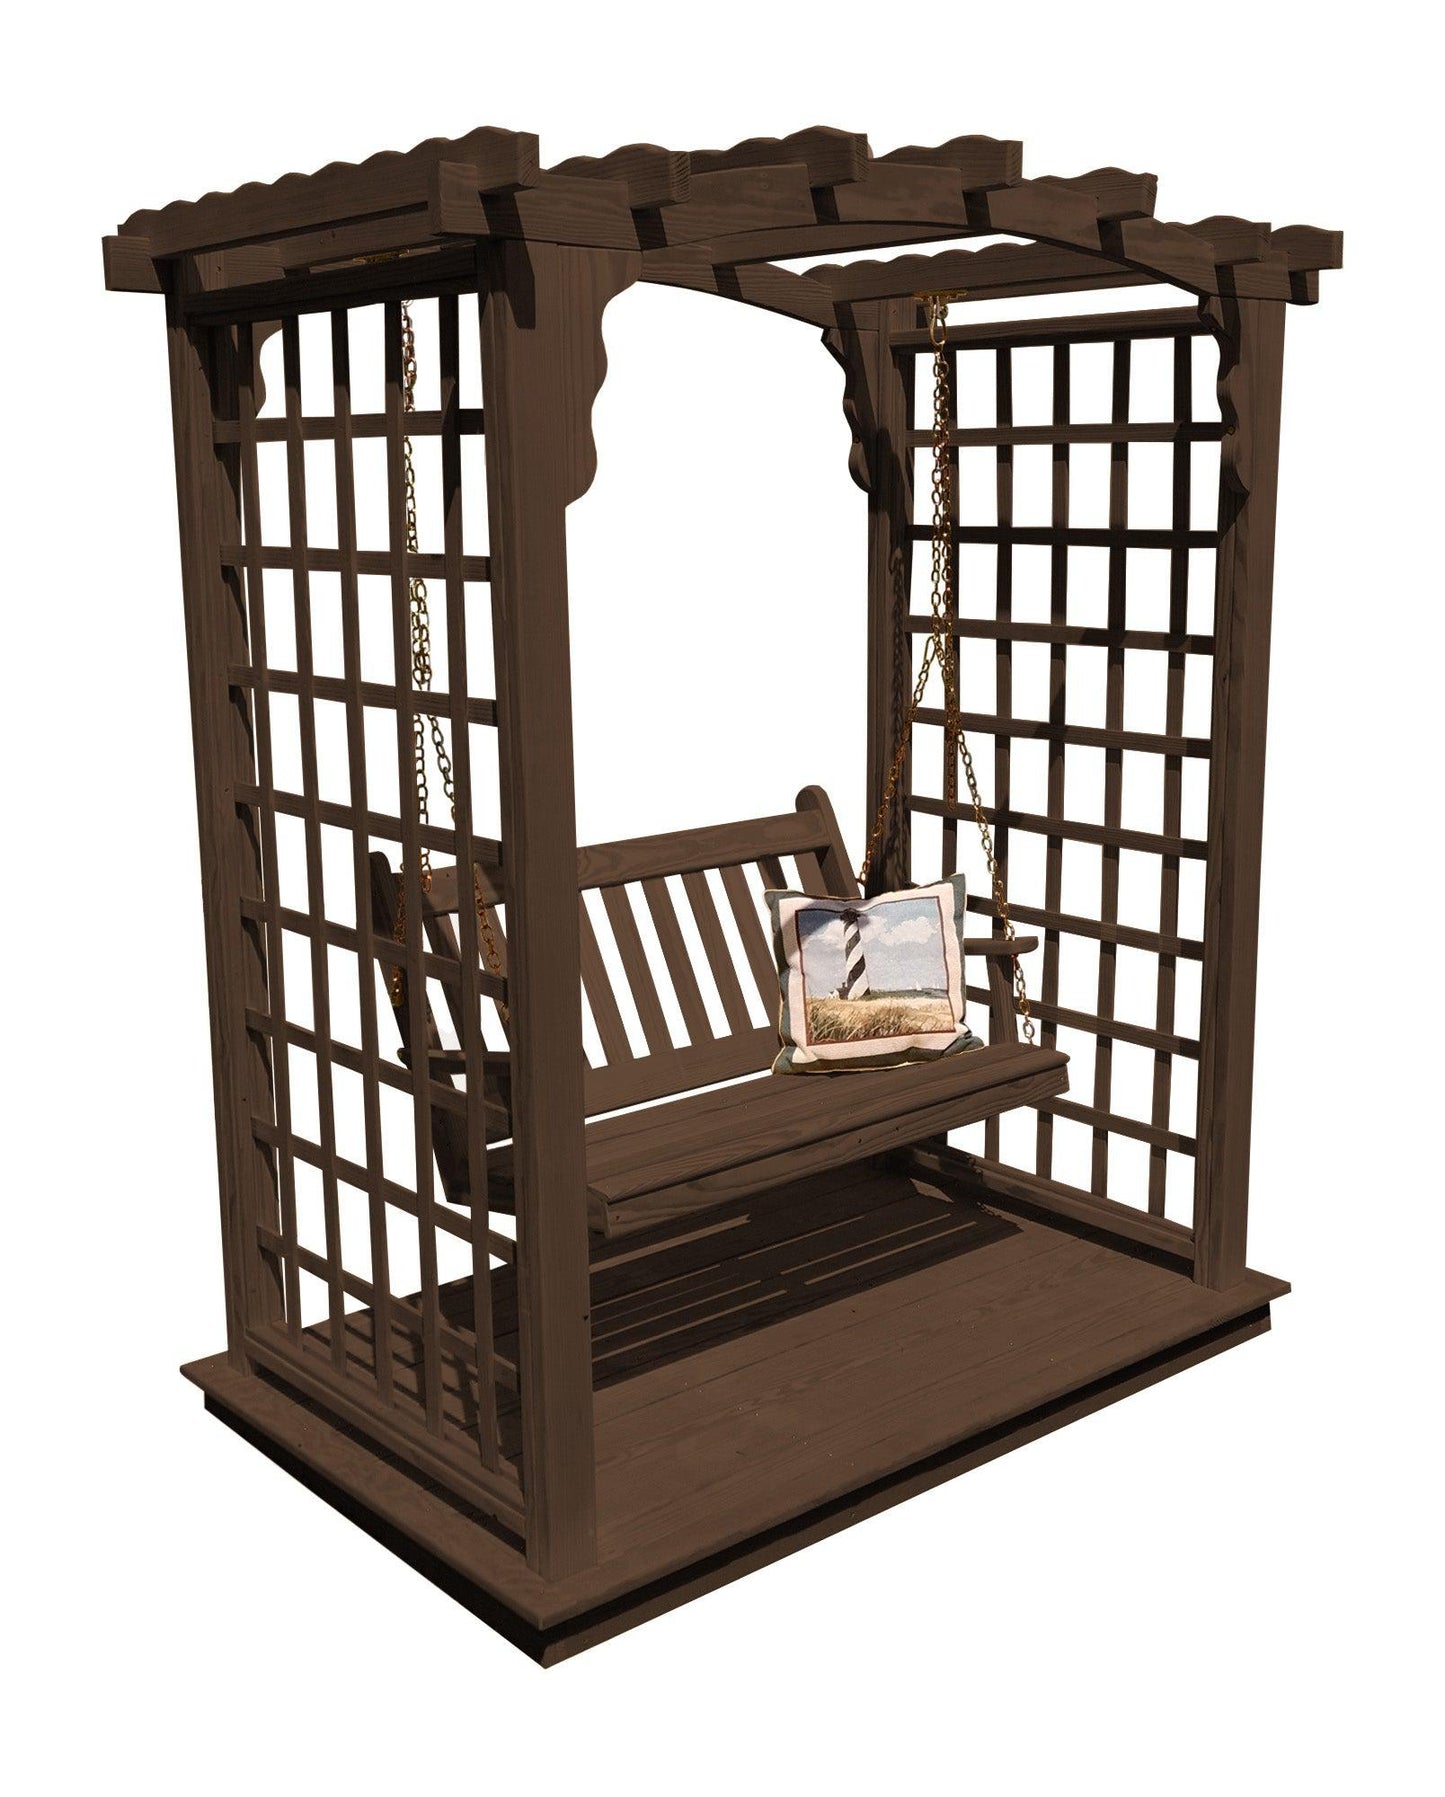 A&L FURNITURE CO. 6' Cambridge Pressure Treated Pine Arbor w/ Deck & Swing - LEAD TIME TO SHIP 10 BUSINESS DAYS